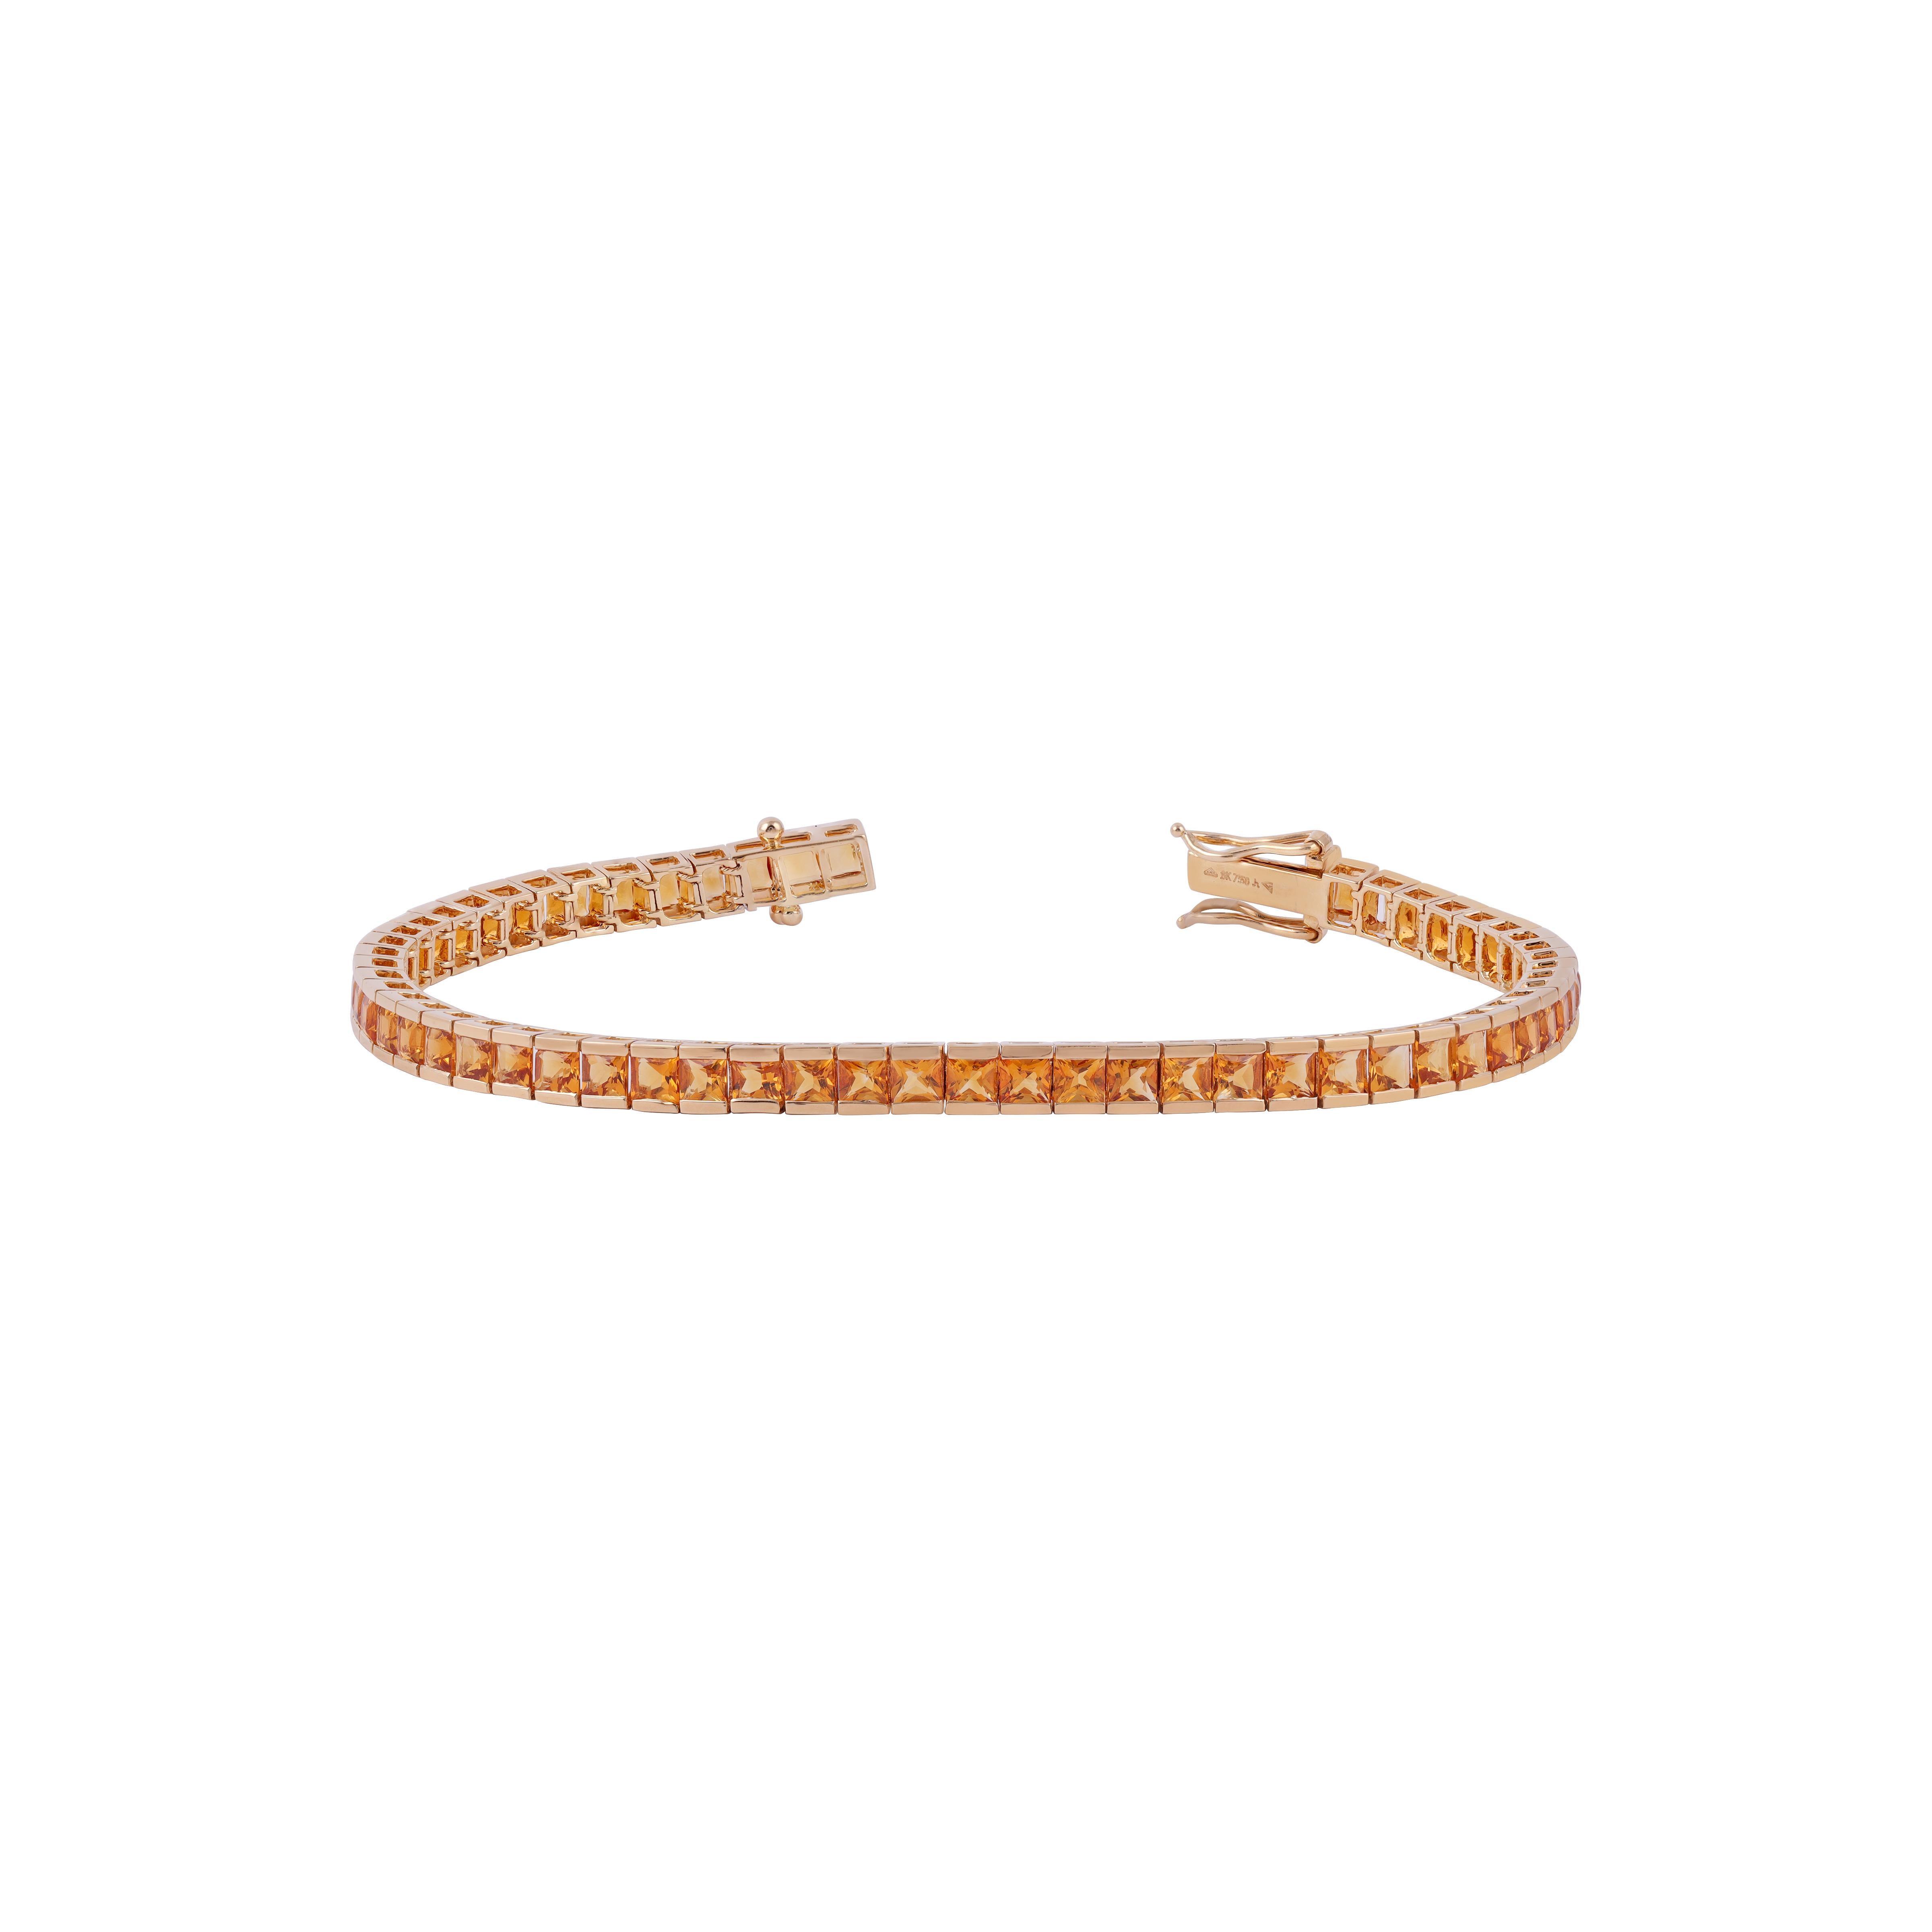 This is an elegant ruby bracelet features   princess cut Citrine 7.54 carat in the channel setting, this bracelet entirely made in 18 karat  gold weight 12.81 grams, this is a classic tennis bracelet.
Size - 7 inch's.
 